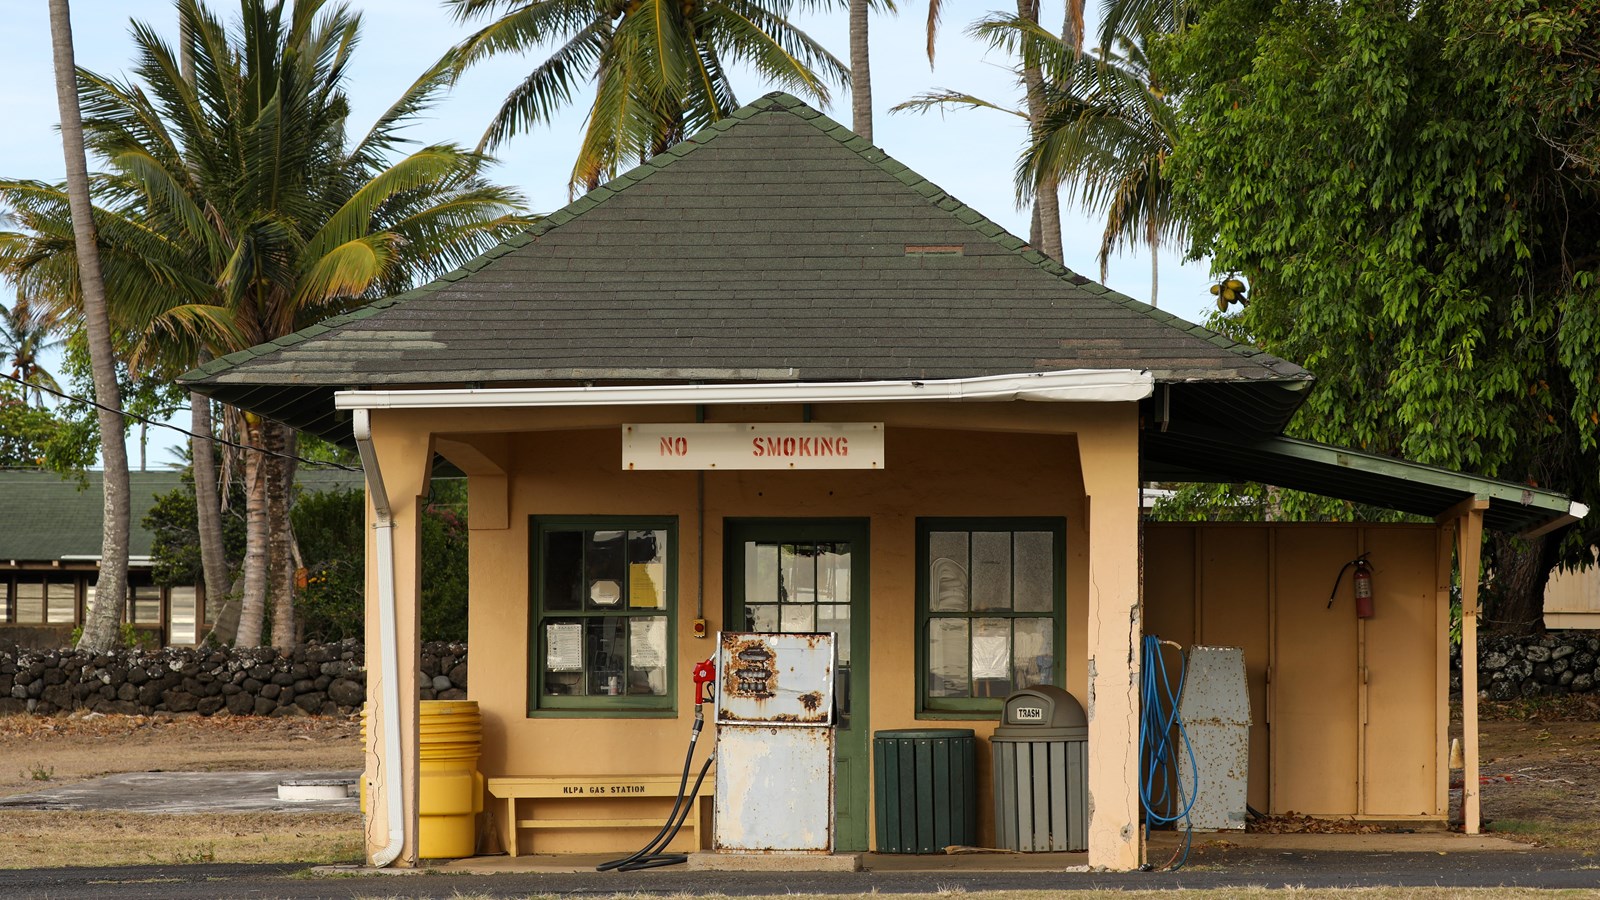 A tan building with a black shingled roof. In the front is a No Smoking sign and a gas pump.